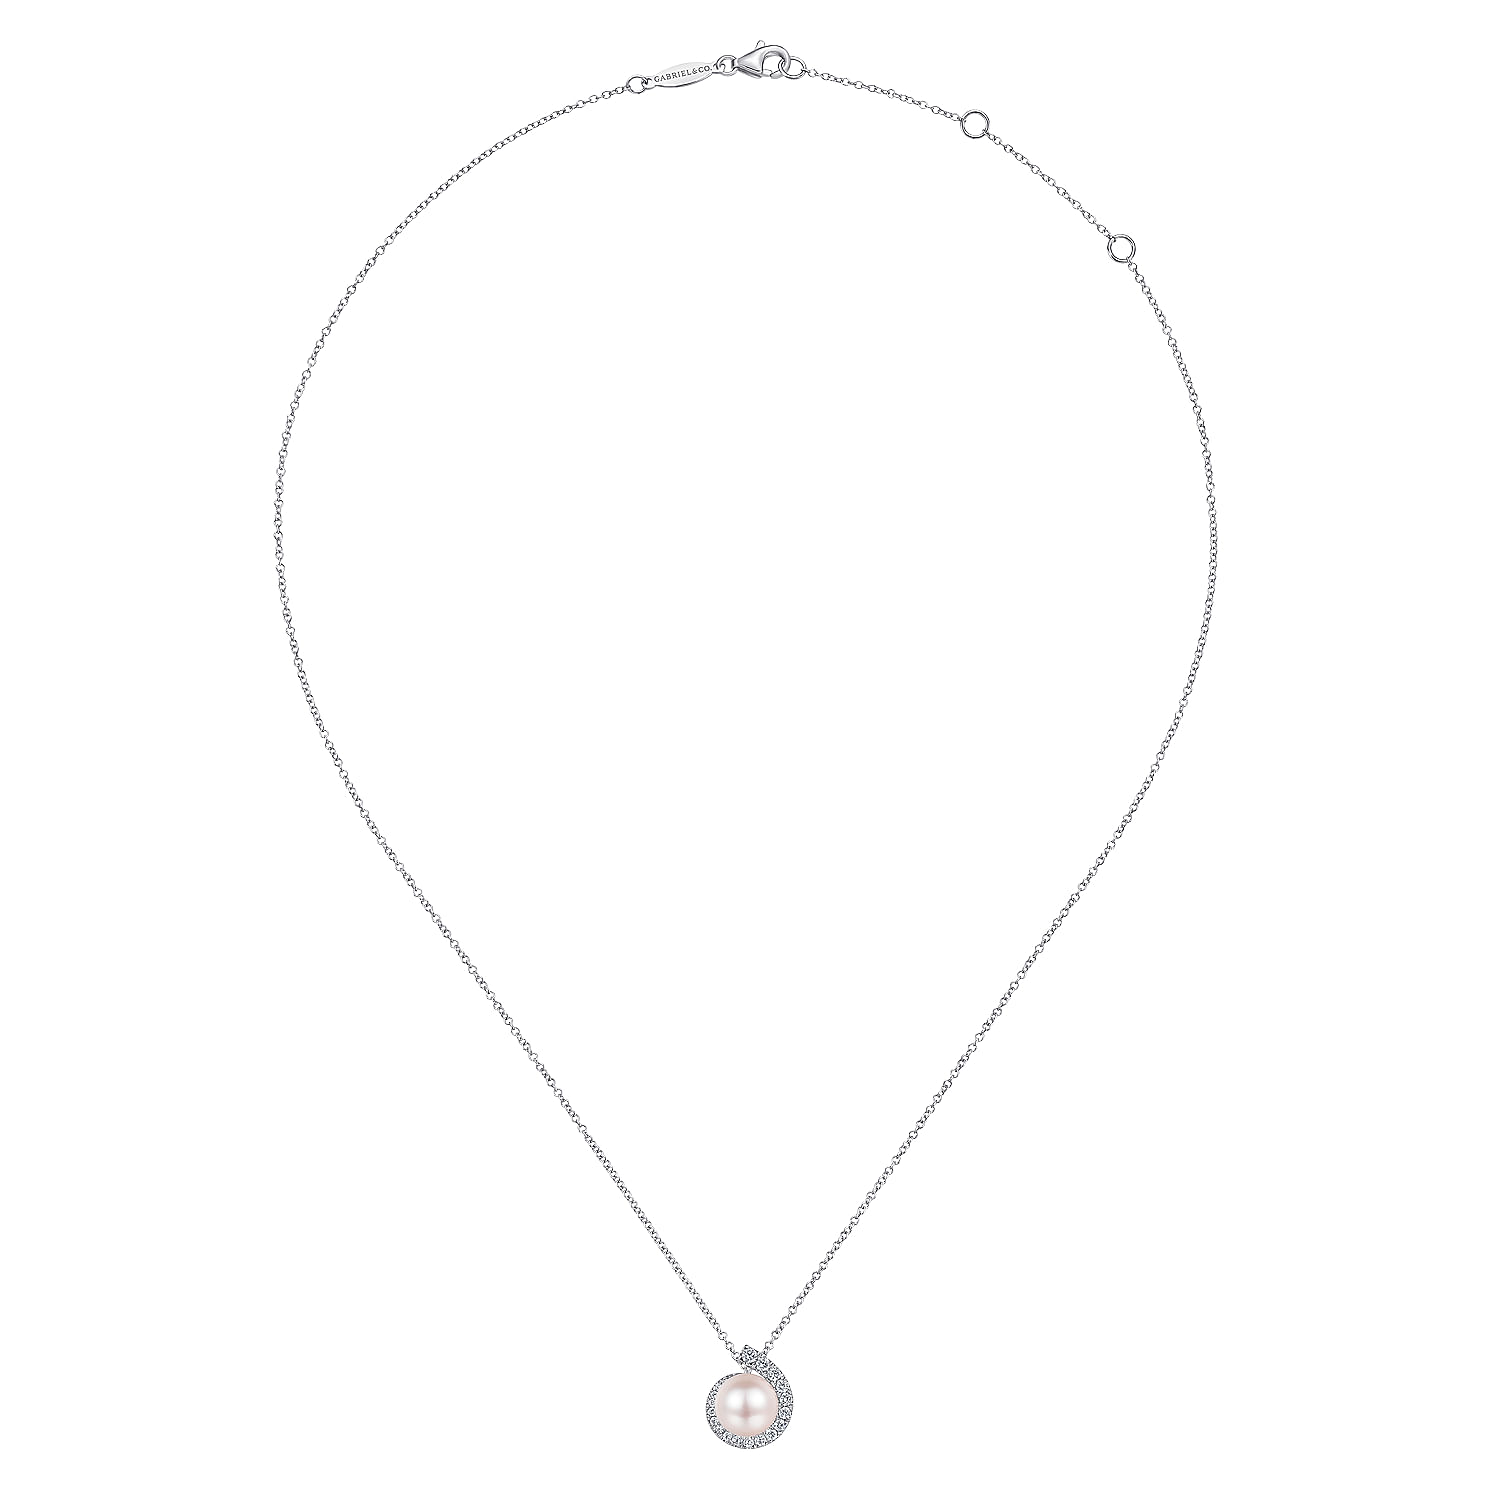 14K White Gold Round Pearl Pendant Necklace with Diamond Halo Swirl